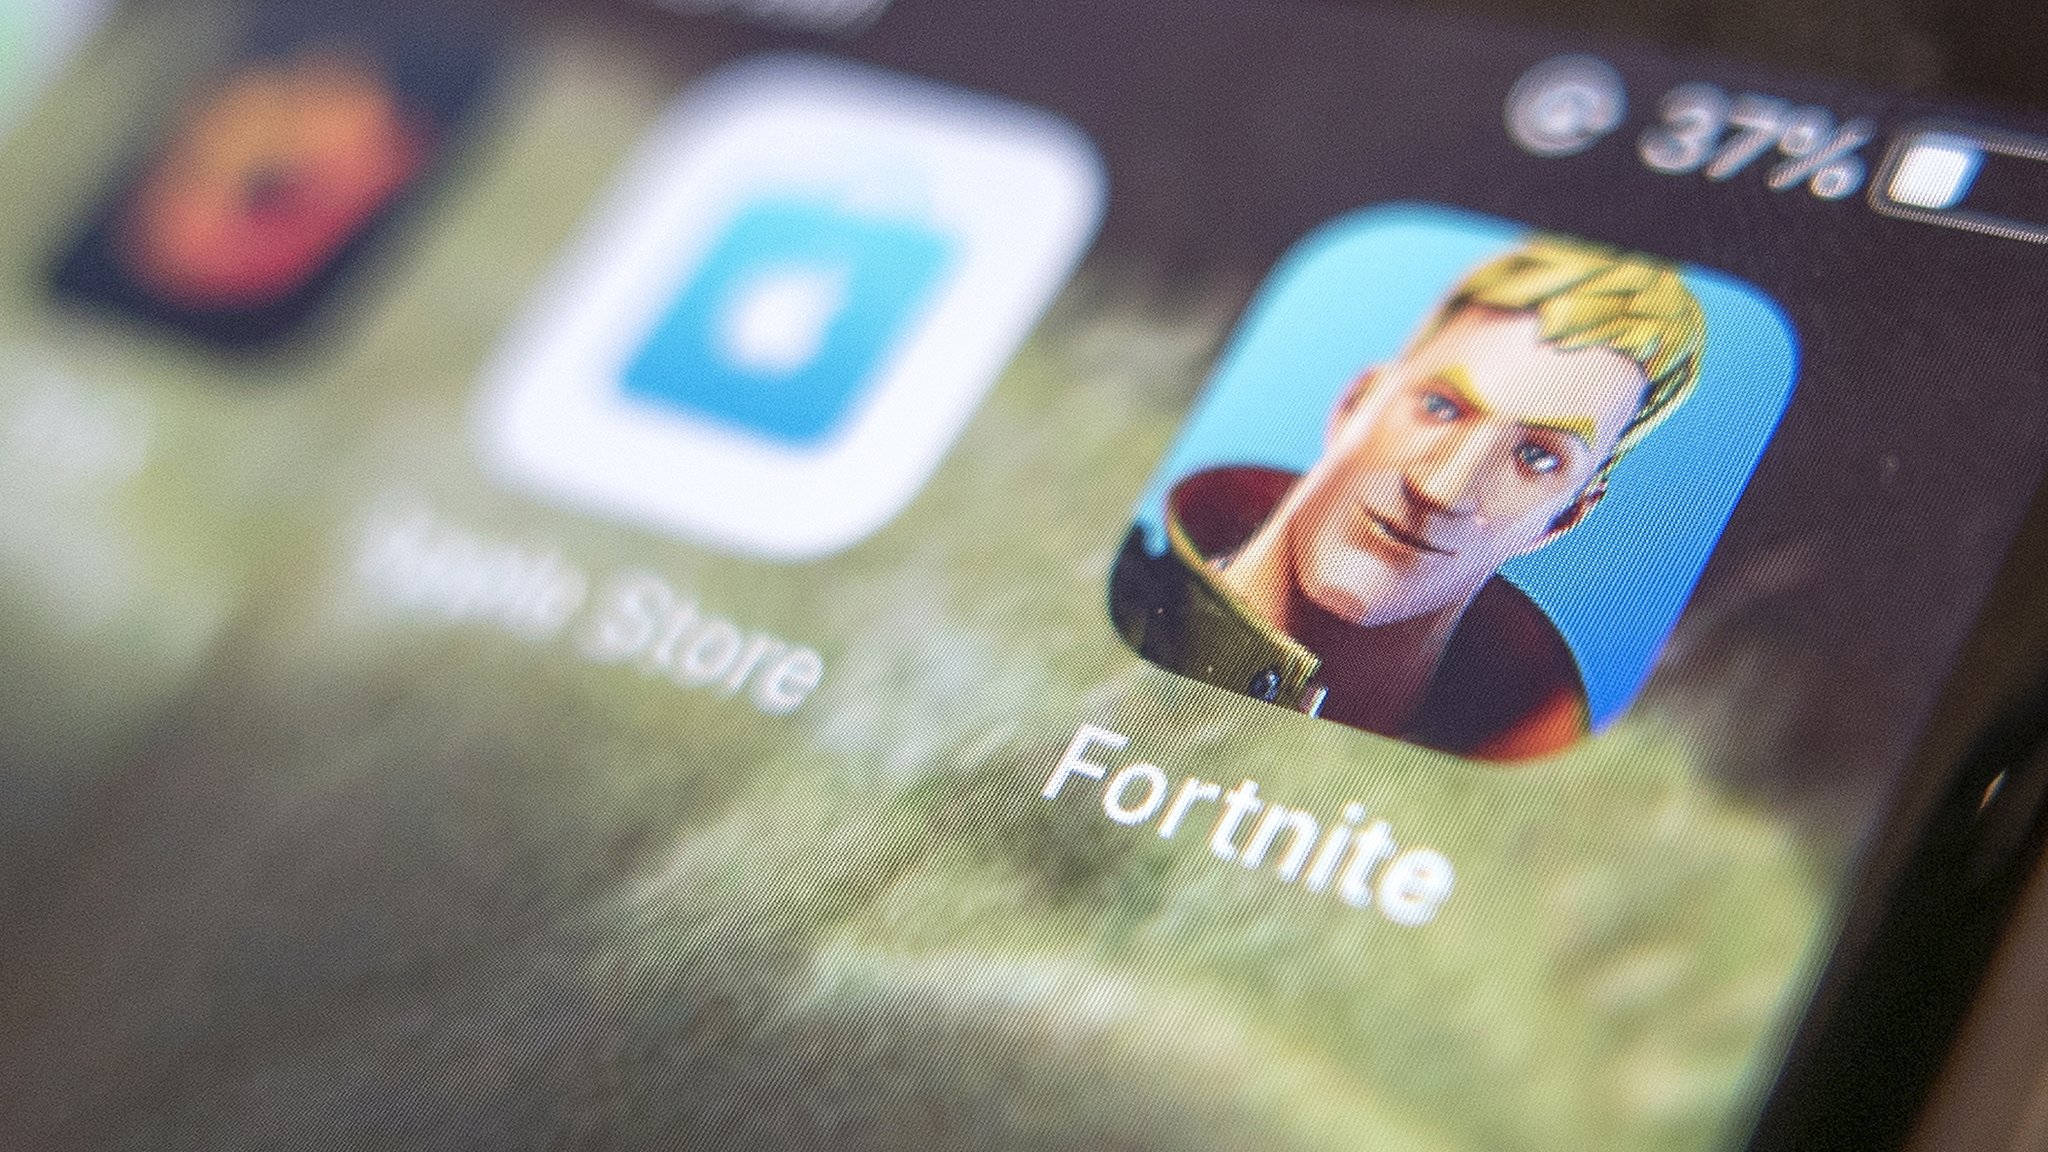 Fortnite is coming back to iOS, but not on the App Store